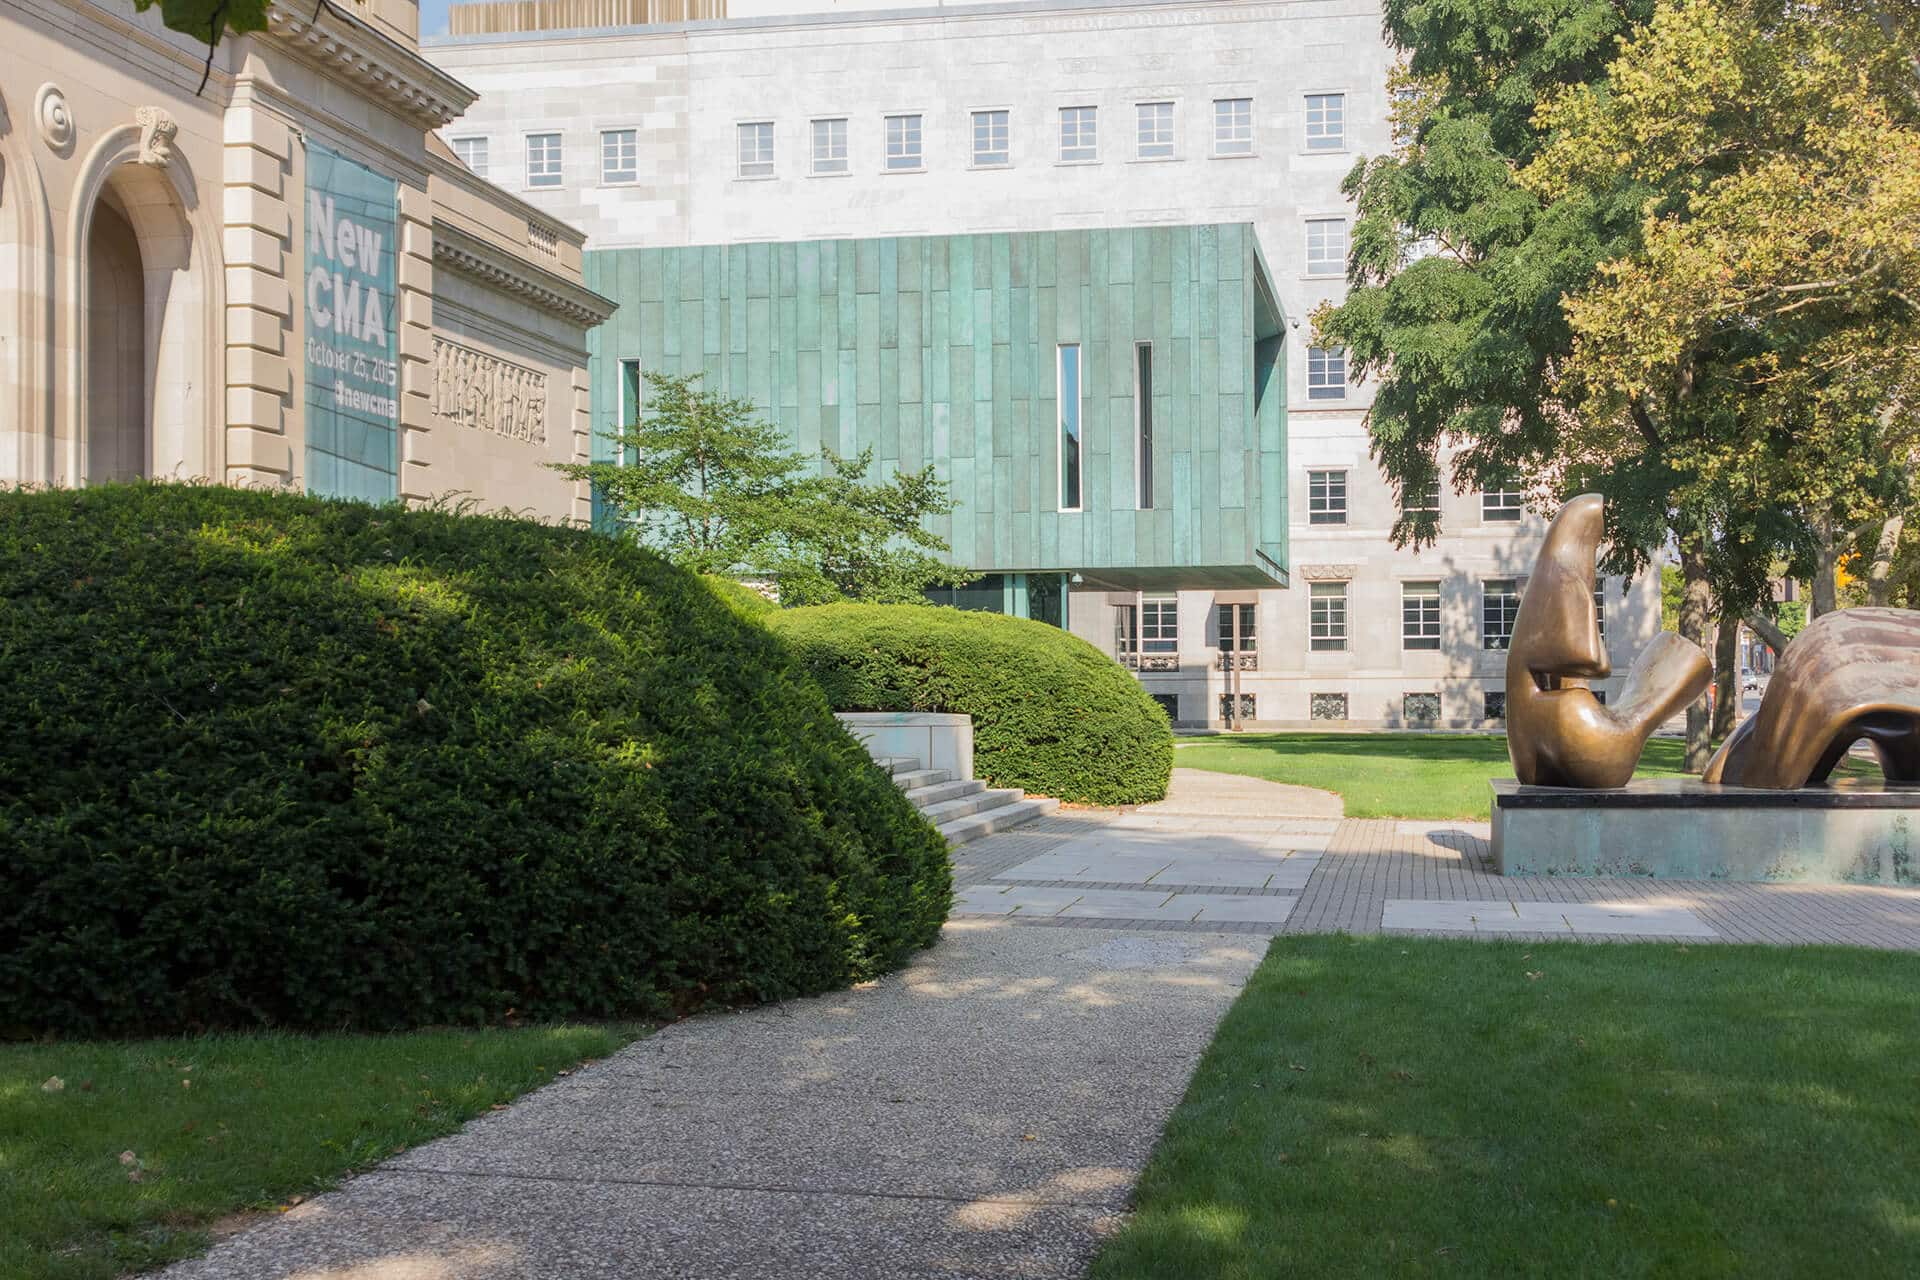 Columbus Museum of Art, view from the main entrance.